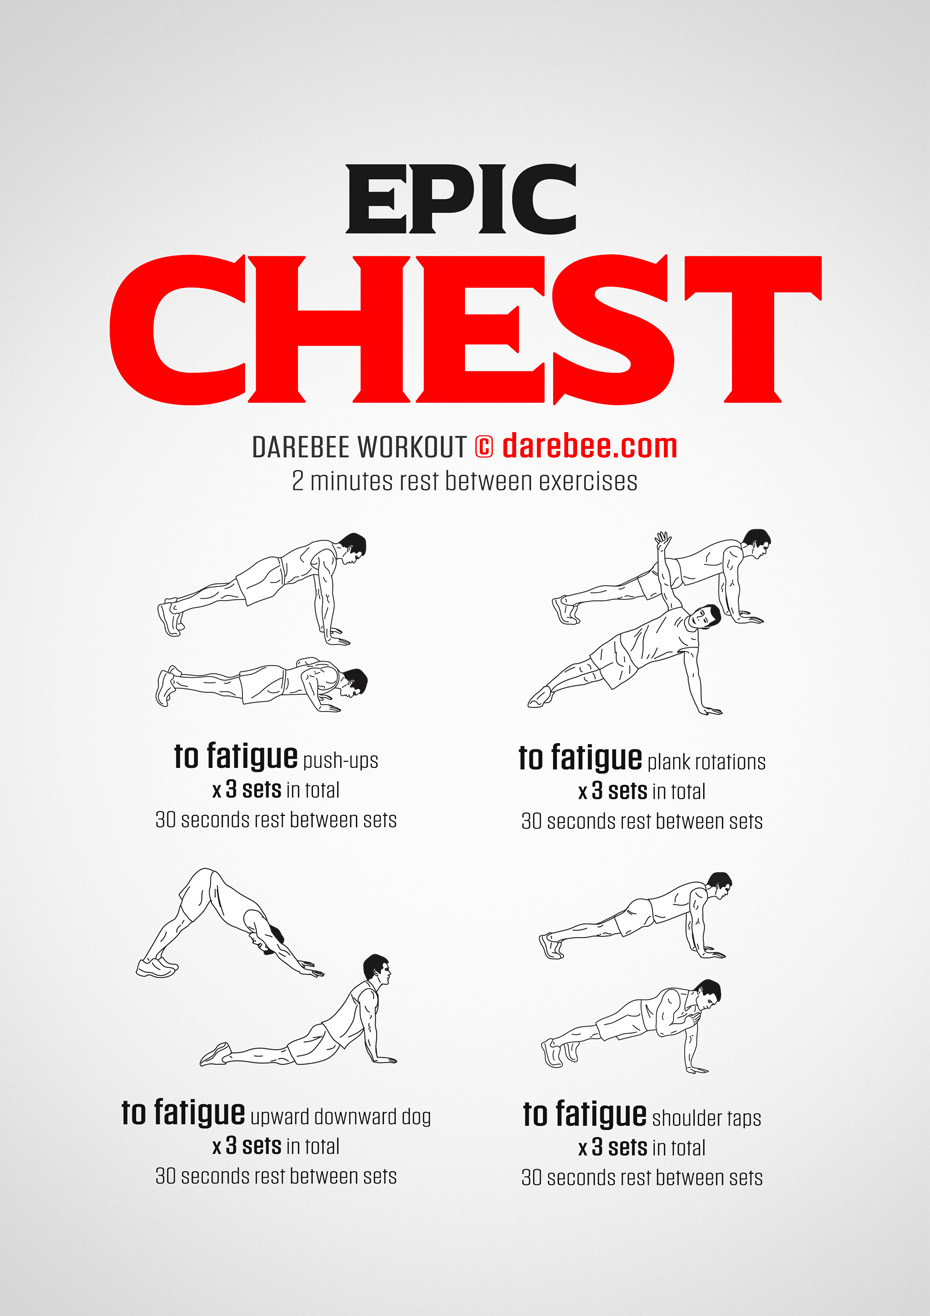 https://darebee.com/images/workouts/epic-chest-workout.jpg